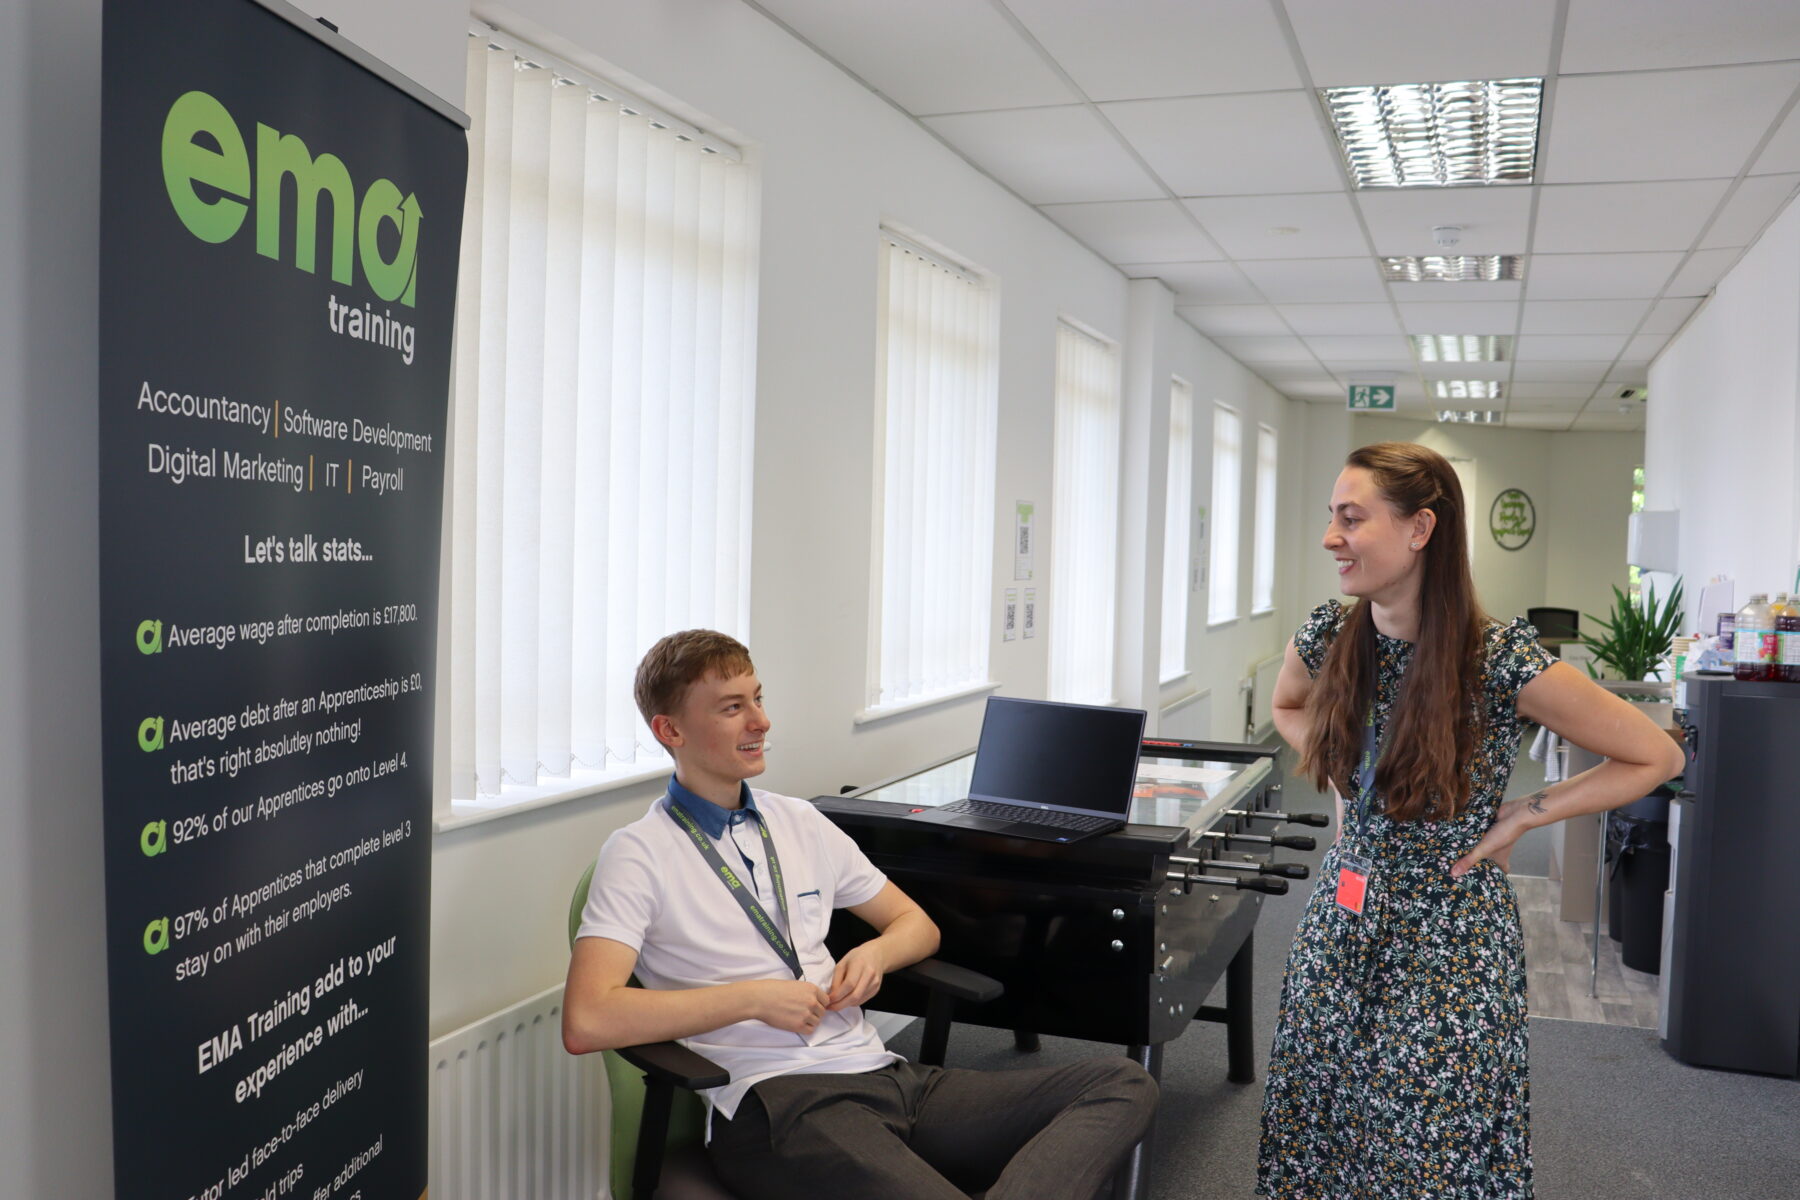 Two members of EMA staff chatting on the top floor of trhe Digital Training Hub. This picture was taken during the 2022 IT & Digital Careers Fair.